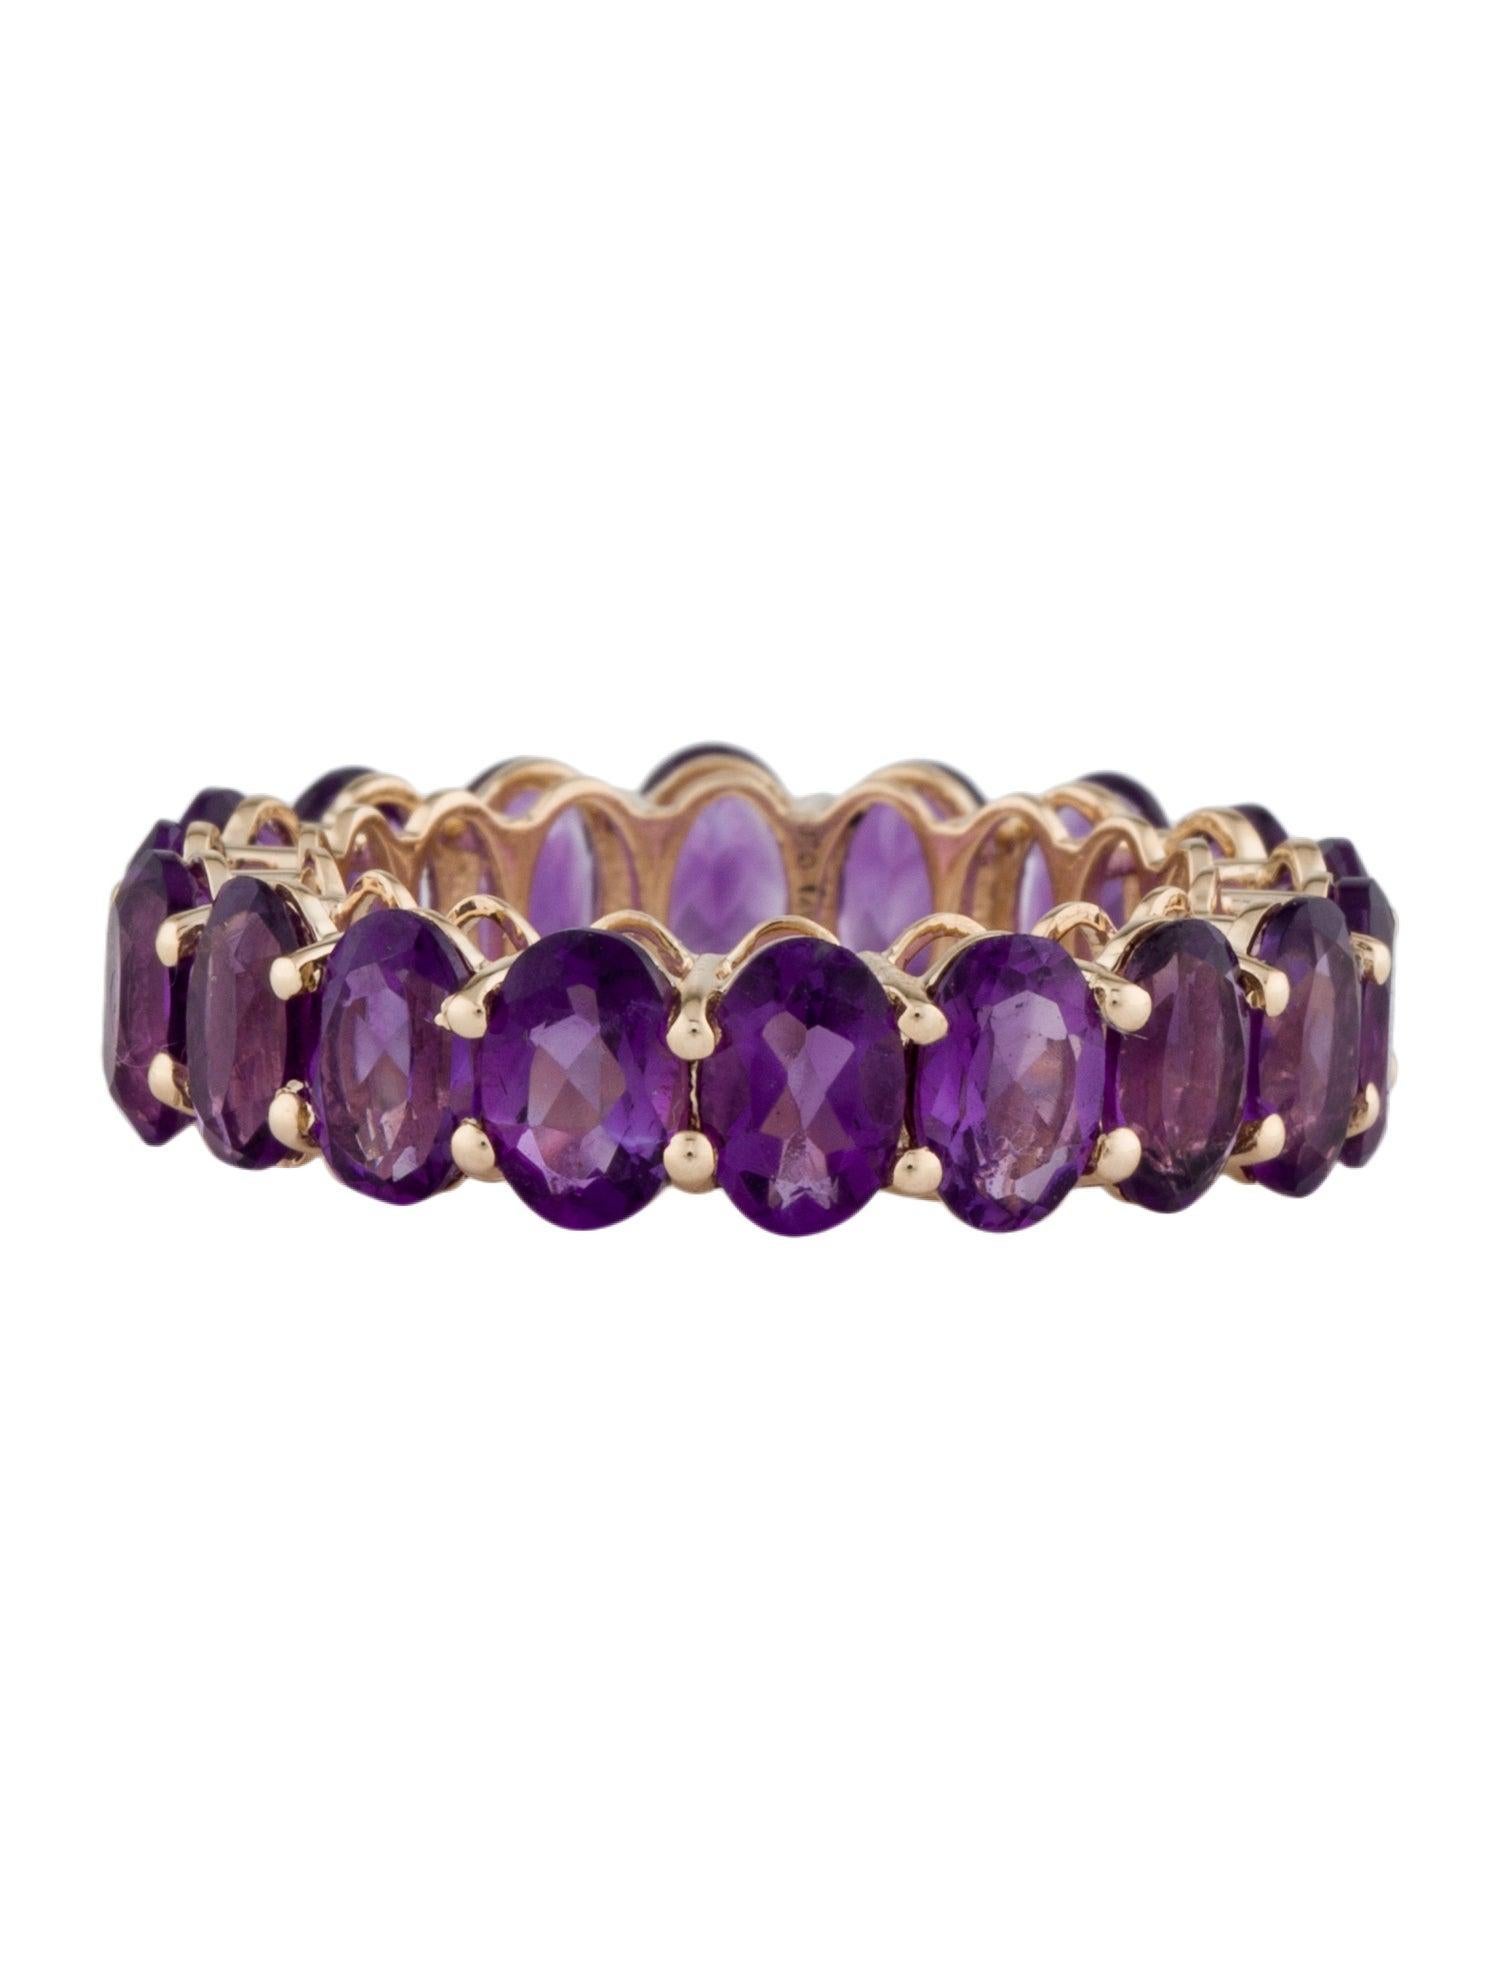 14K Yellow Gold Amethyst Eternity Band, Size 7 Oval Brilliant Purple Amethysts In New Condition For Sale In Holtsville, NY